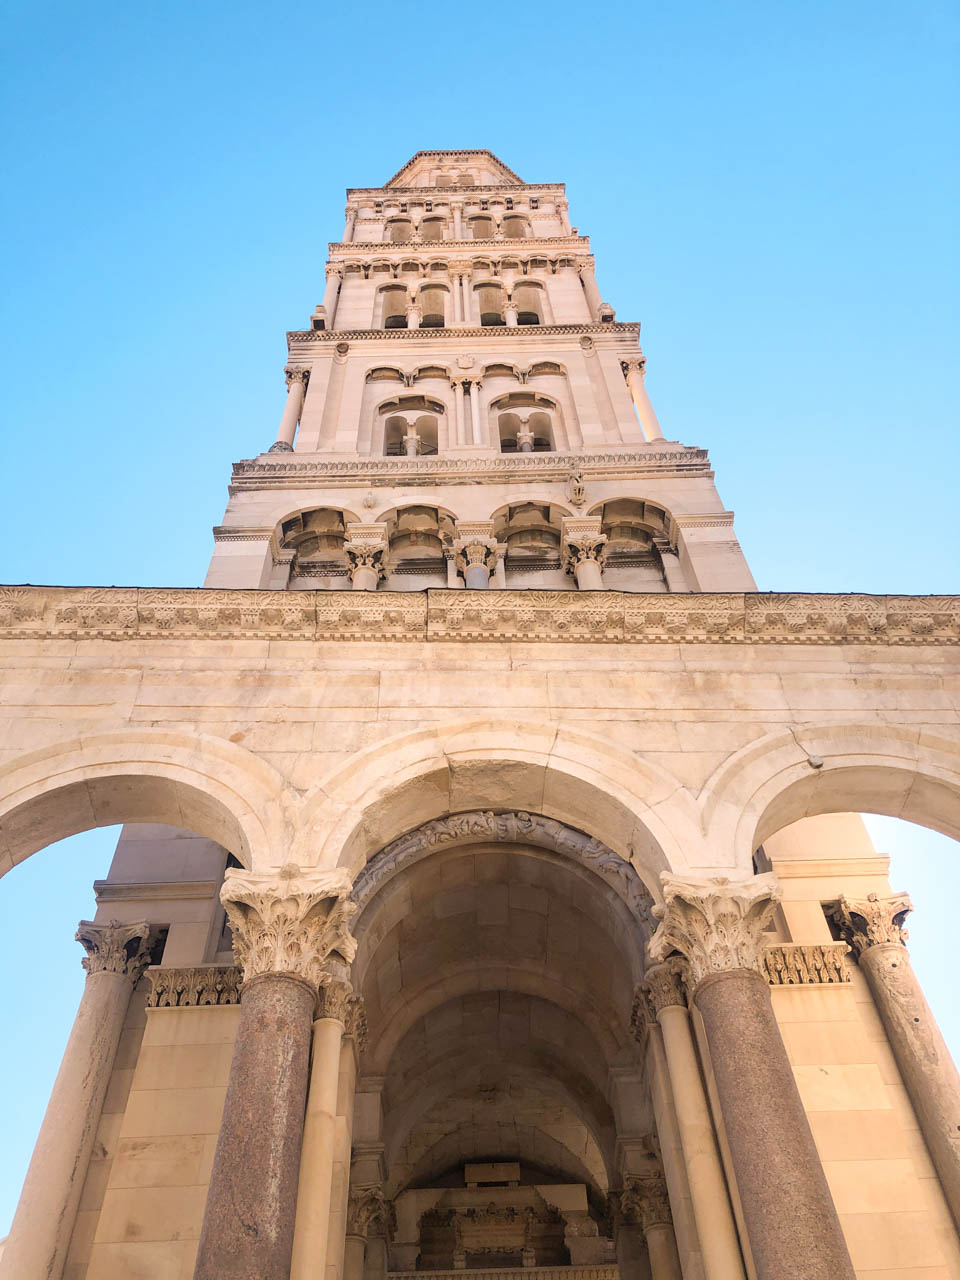 The Saint Domnius Bell Tower in Split Old Town seen from the ground